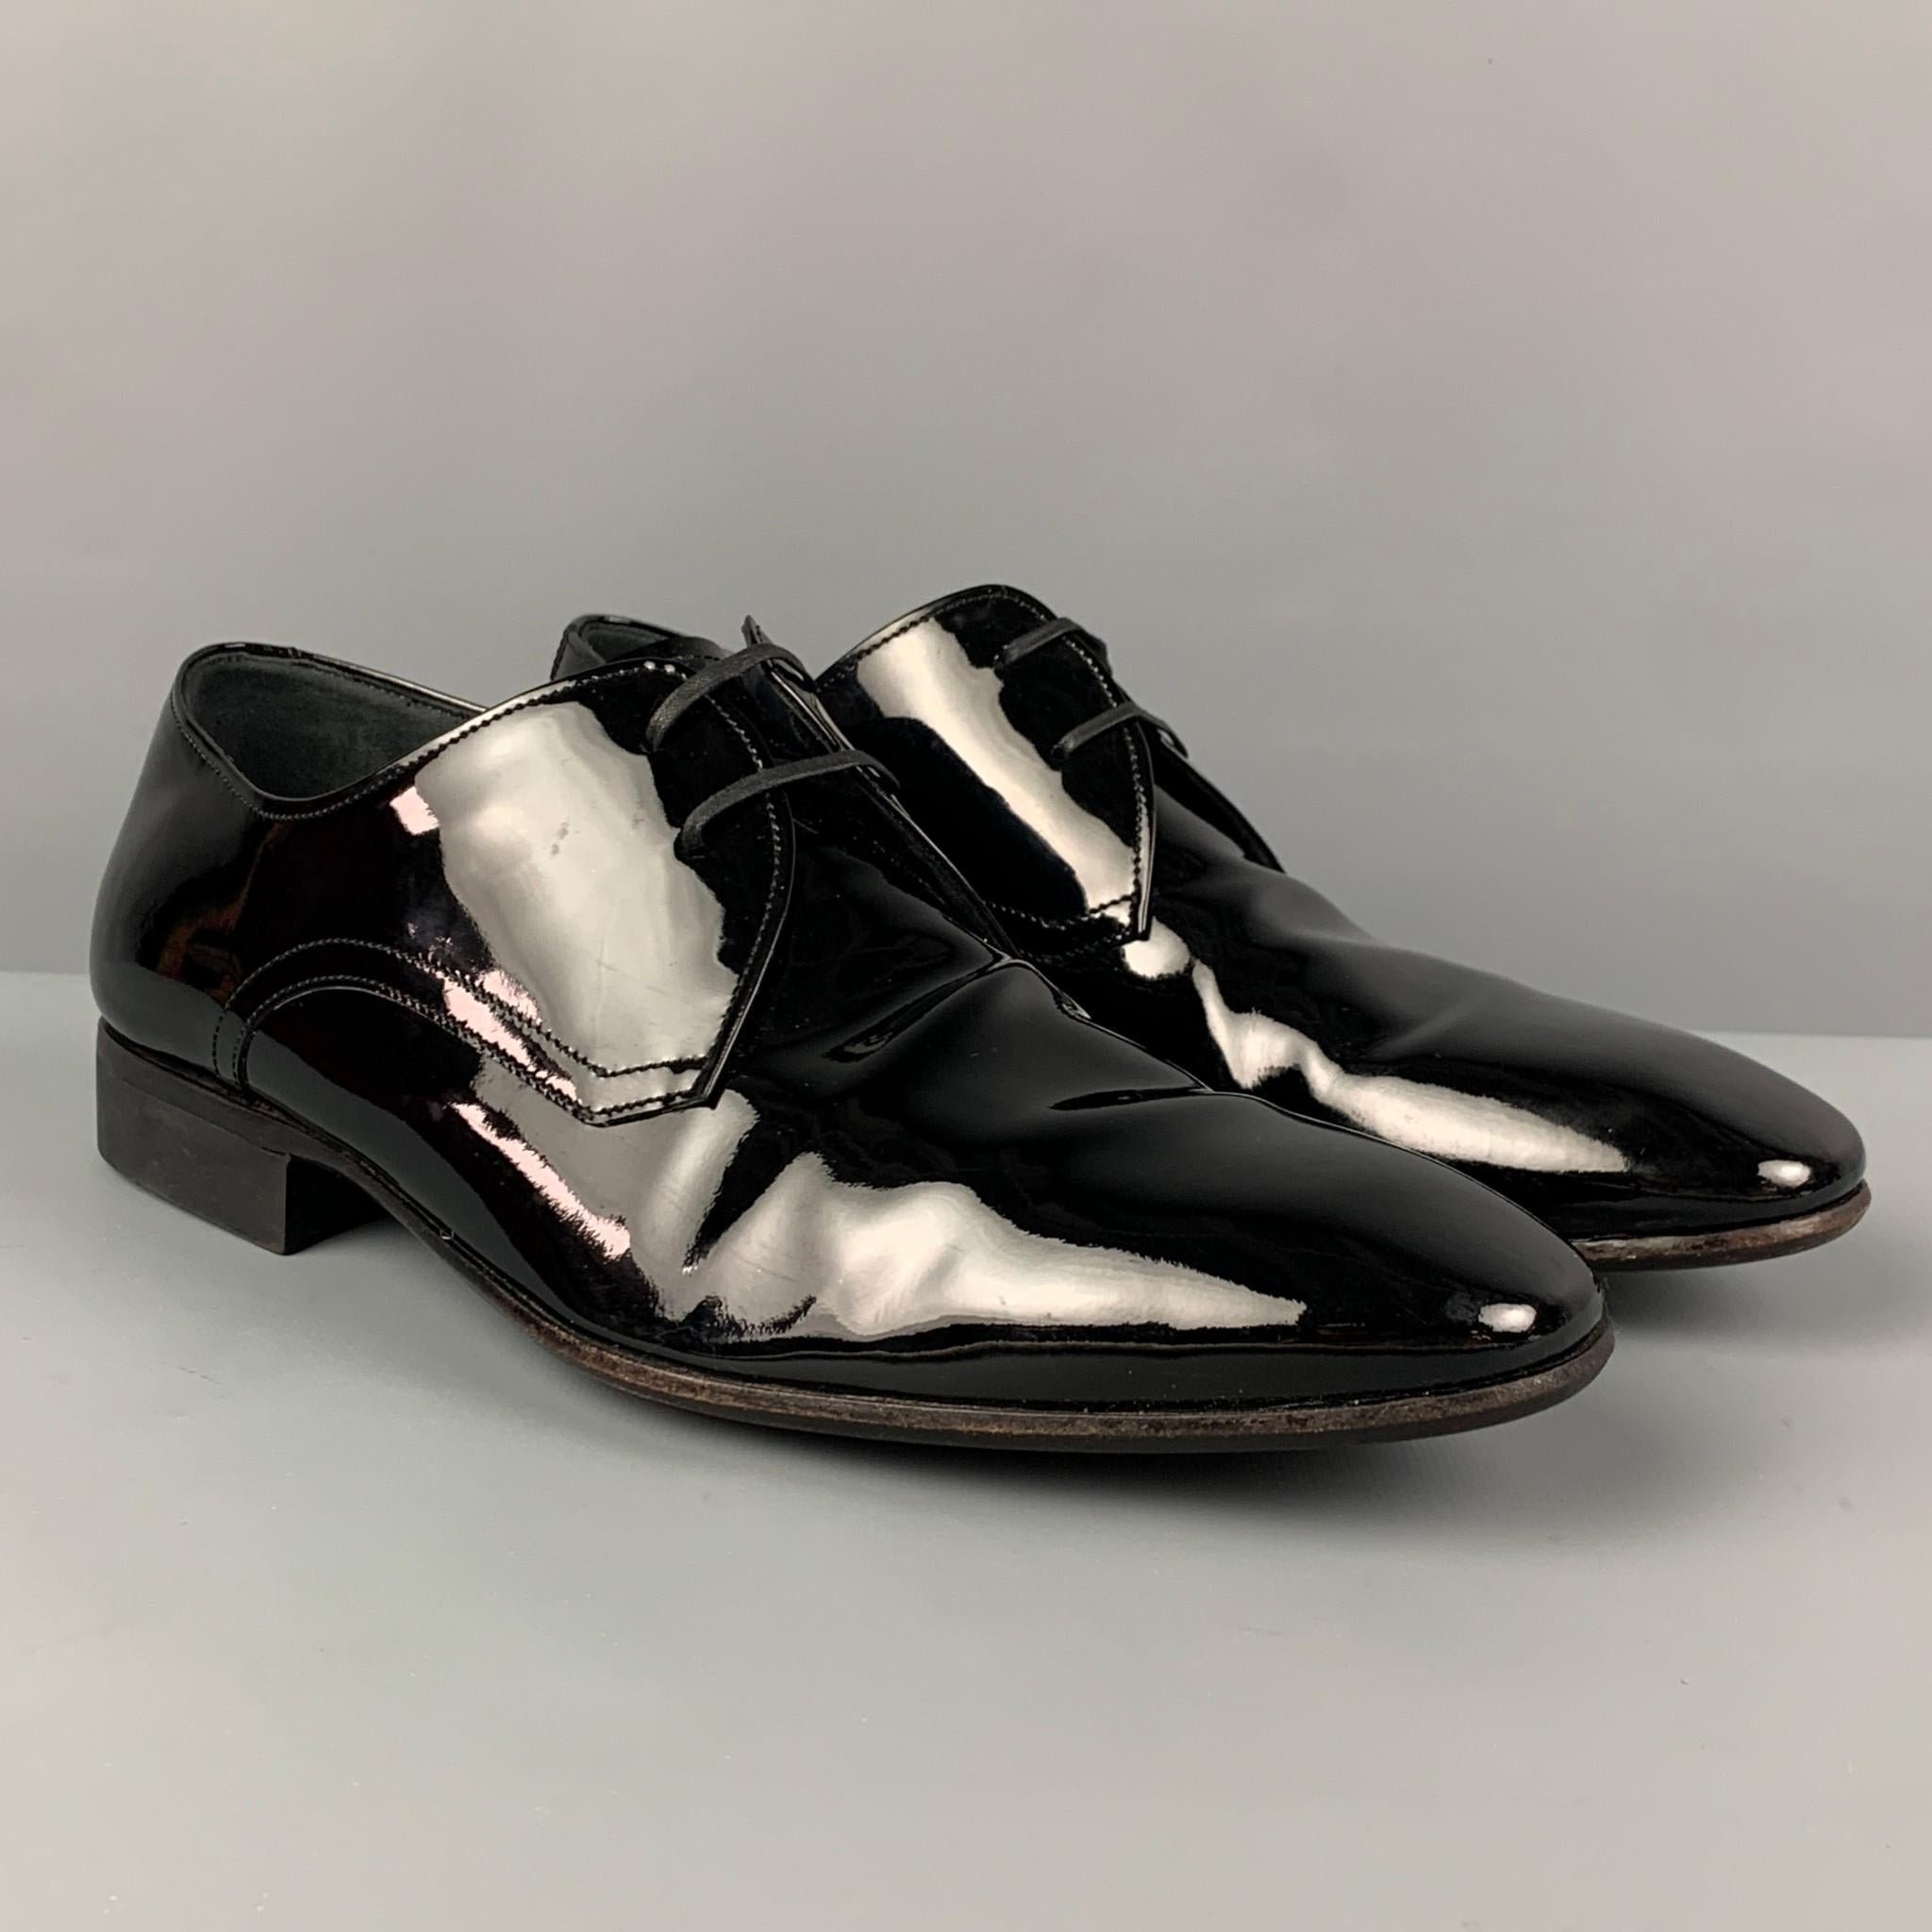 SALVATORE FERRAGAMO shoes comes in a black patent leather featuring a classic style and a lace up closure. Made in Italy. 

Very Good Pre-Owned Condition.
Marked: 8  EE

Outsole: 11.5 in. x 3.75 in. 